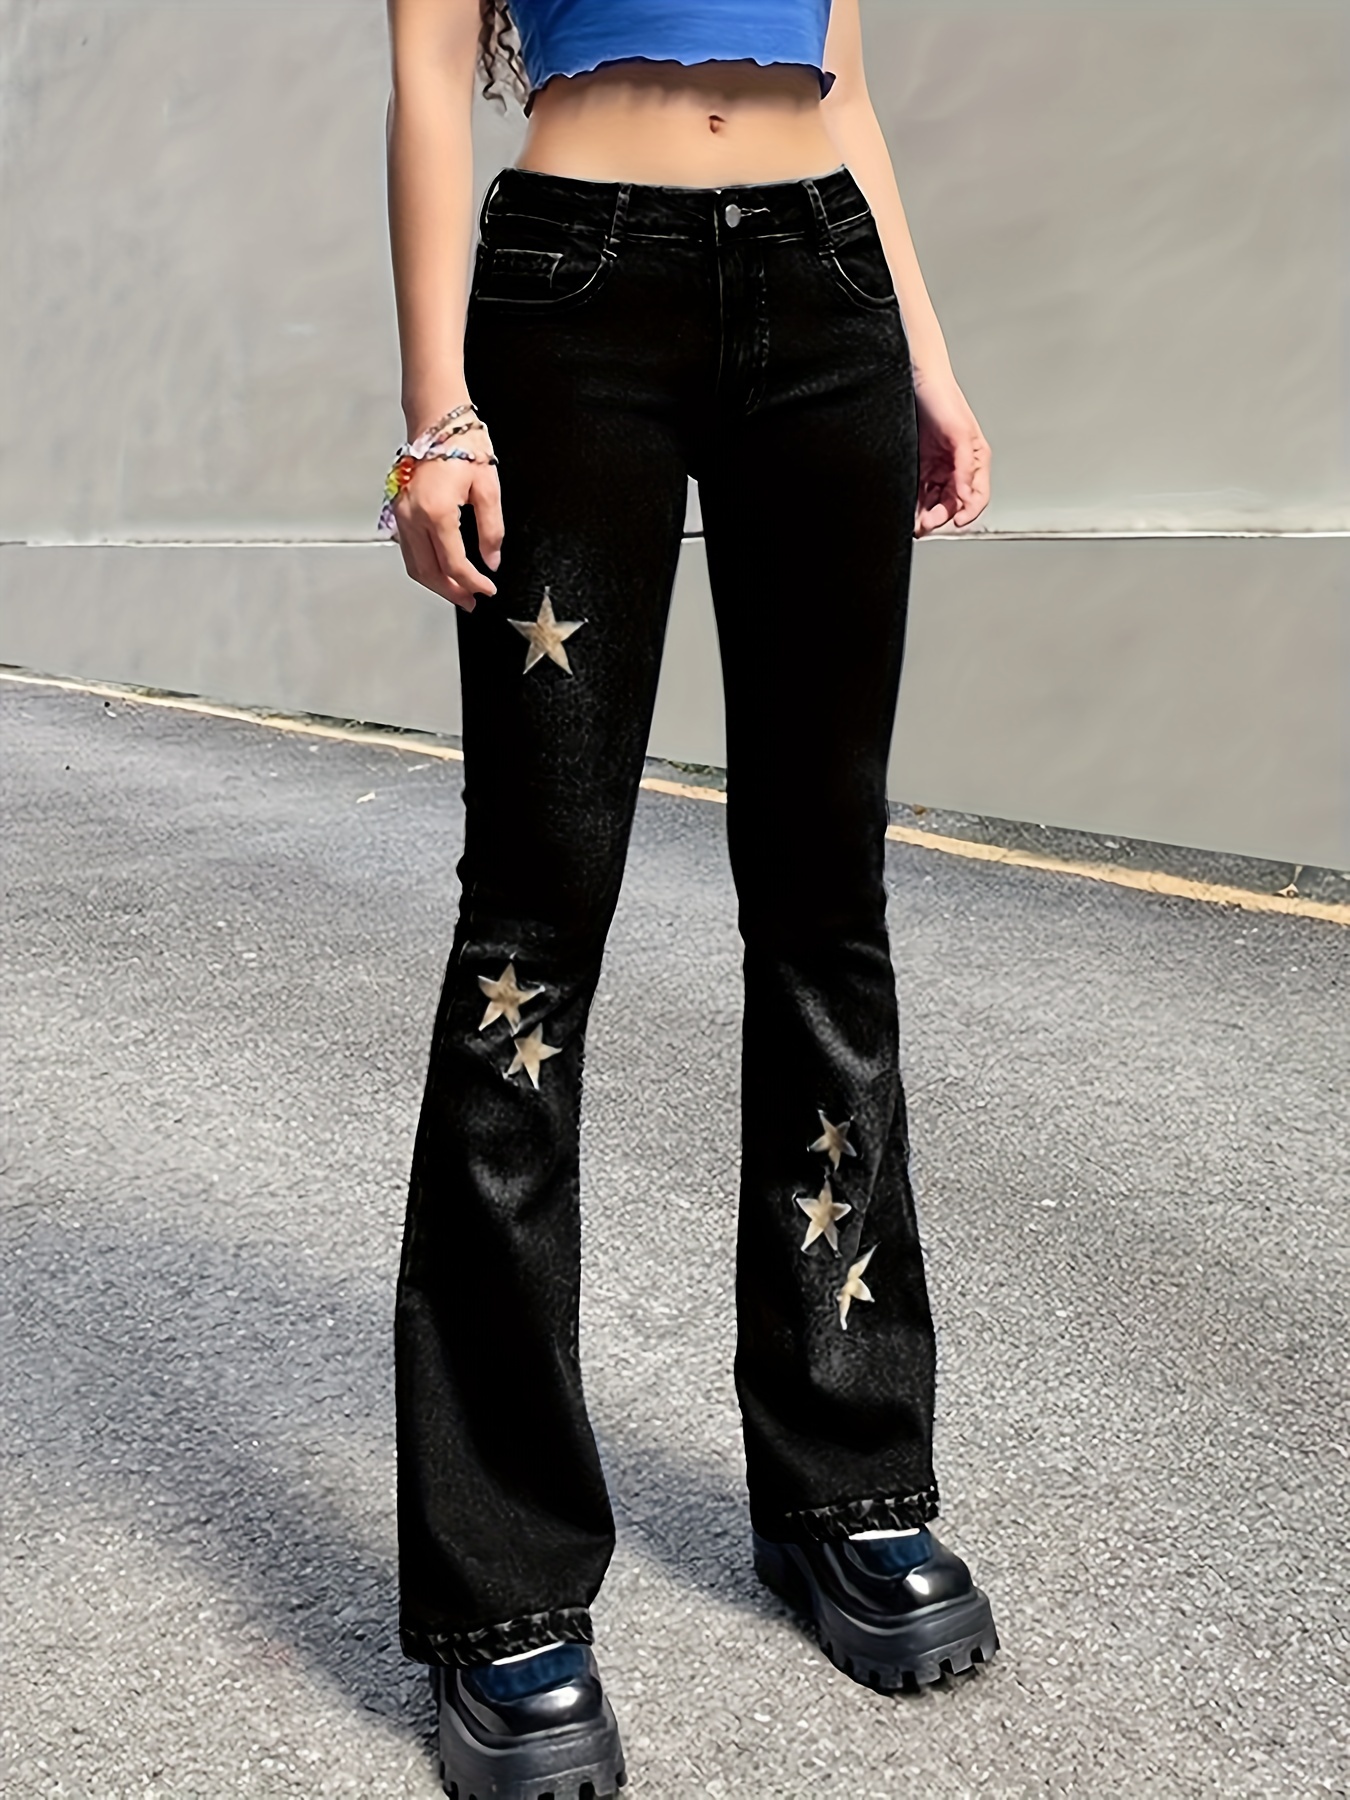 Embroidered Denim Pants for Woman in Denim/gold